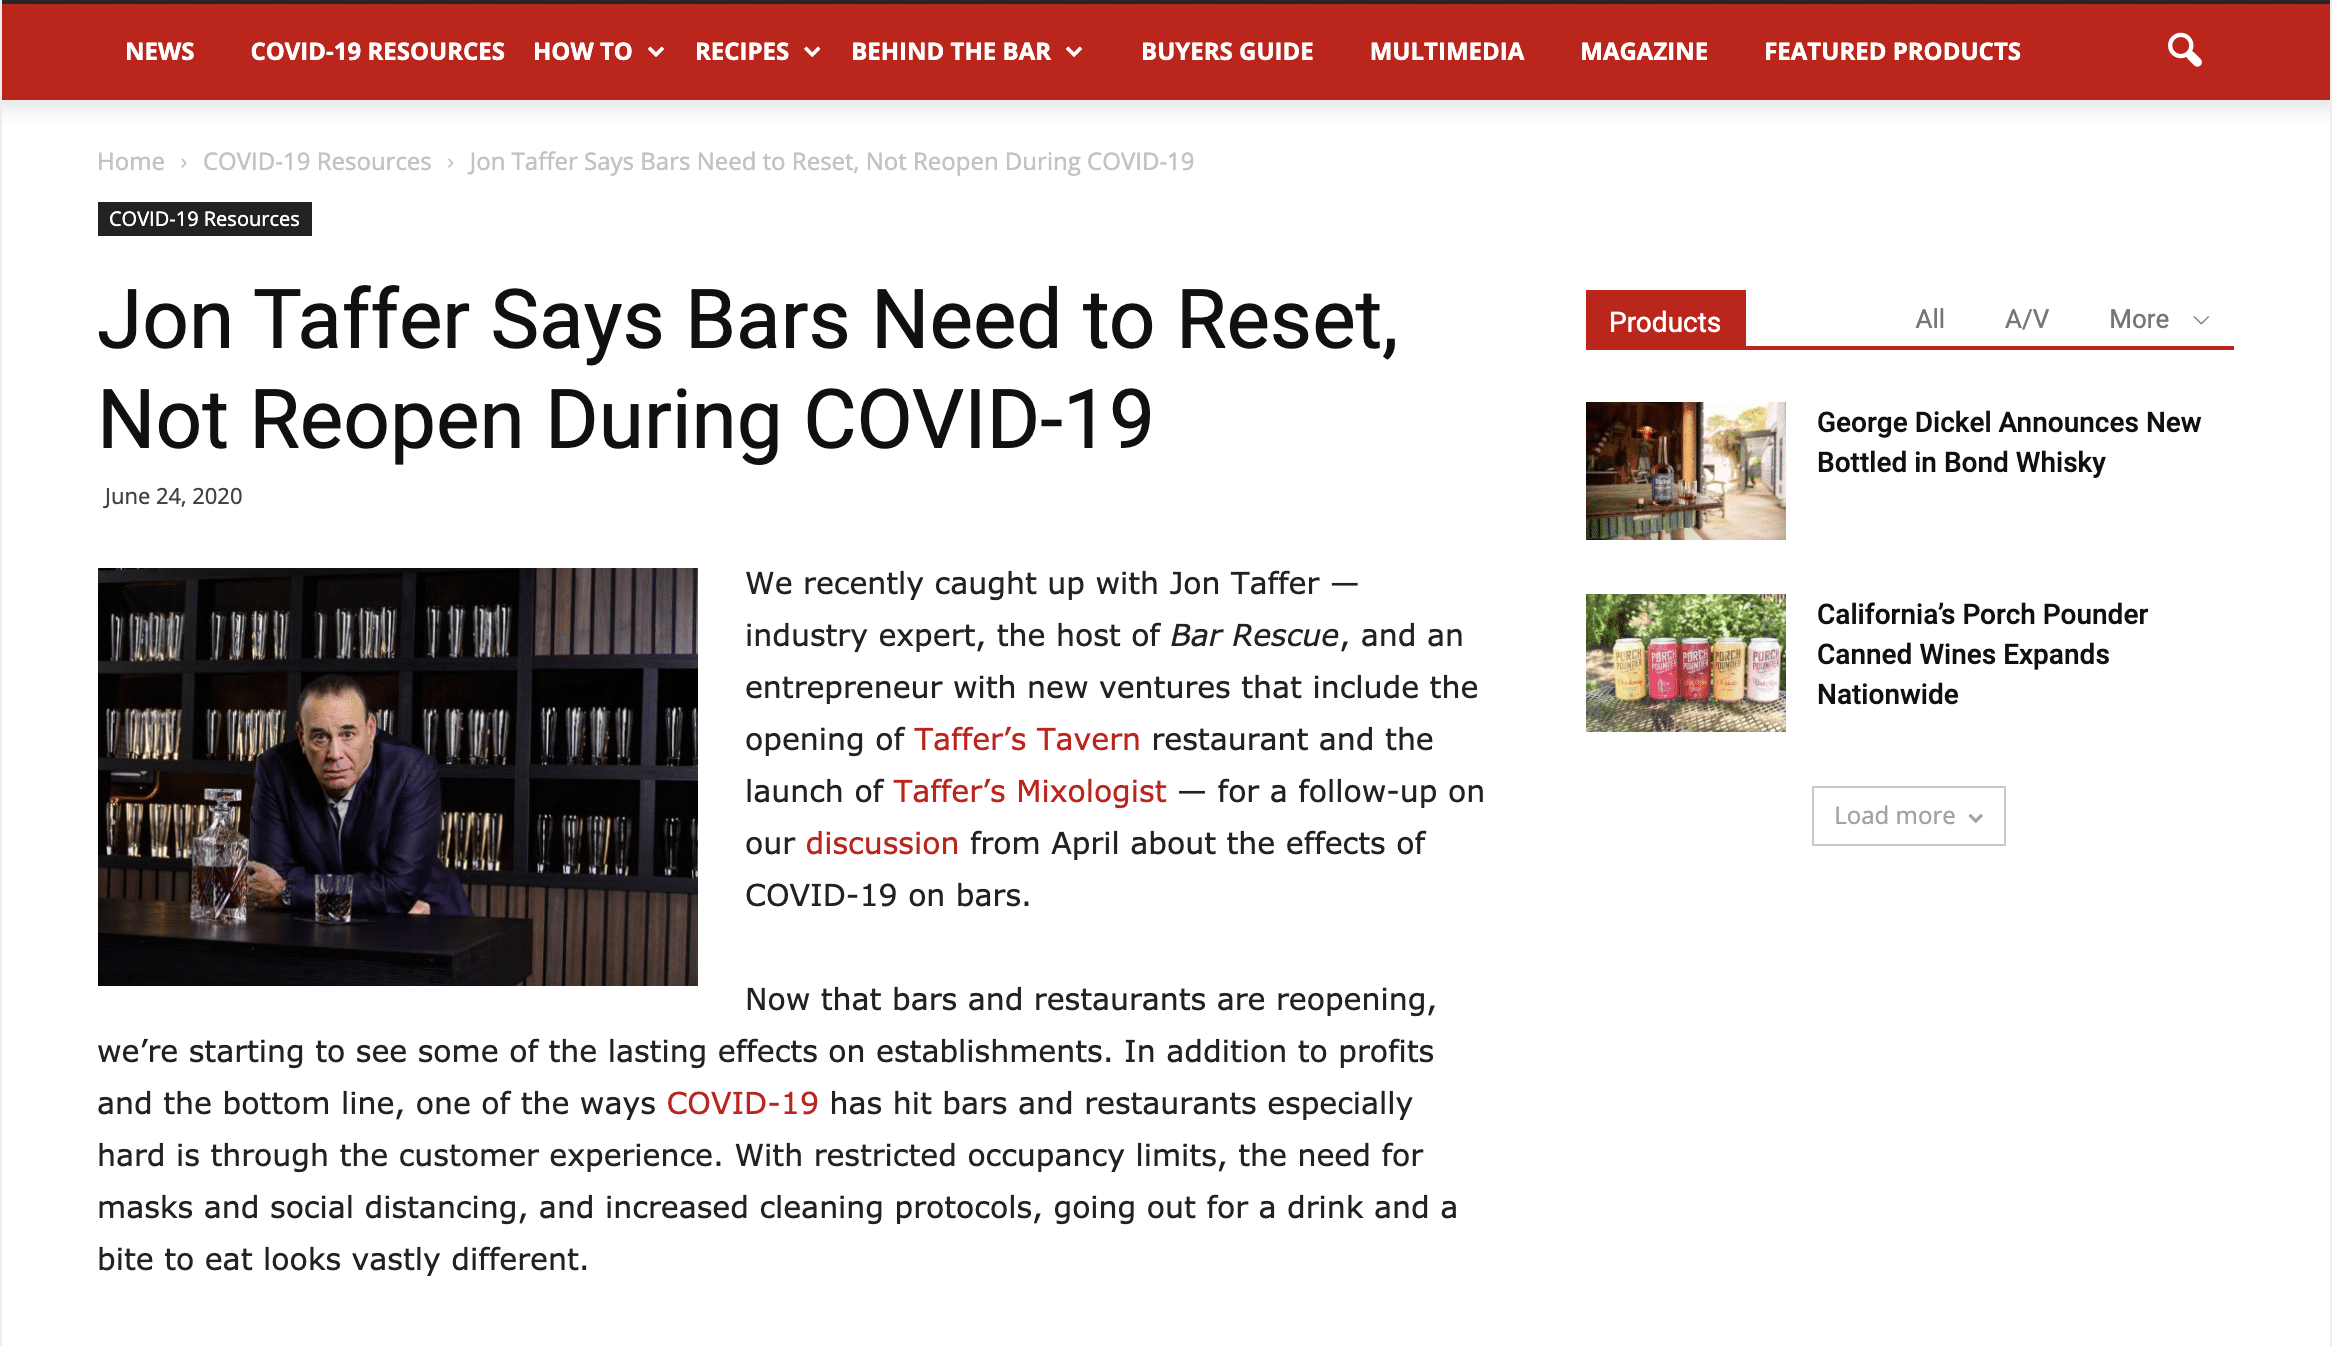 Jon Taffer Says Bars Need to Reset, Not Reopen During COVID-19